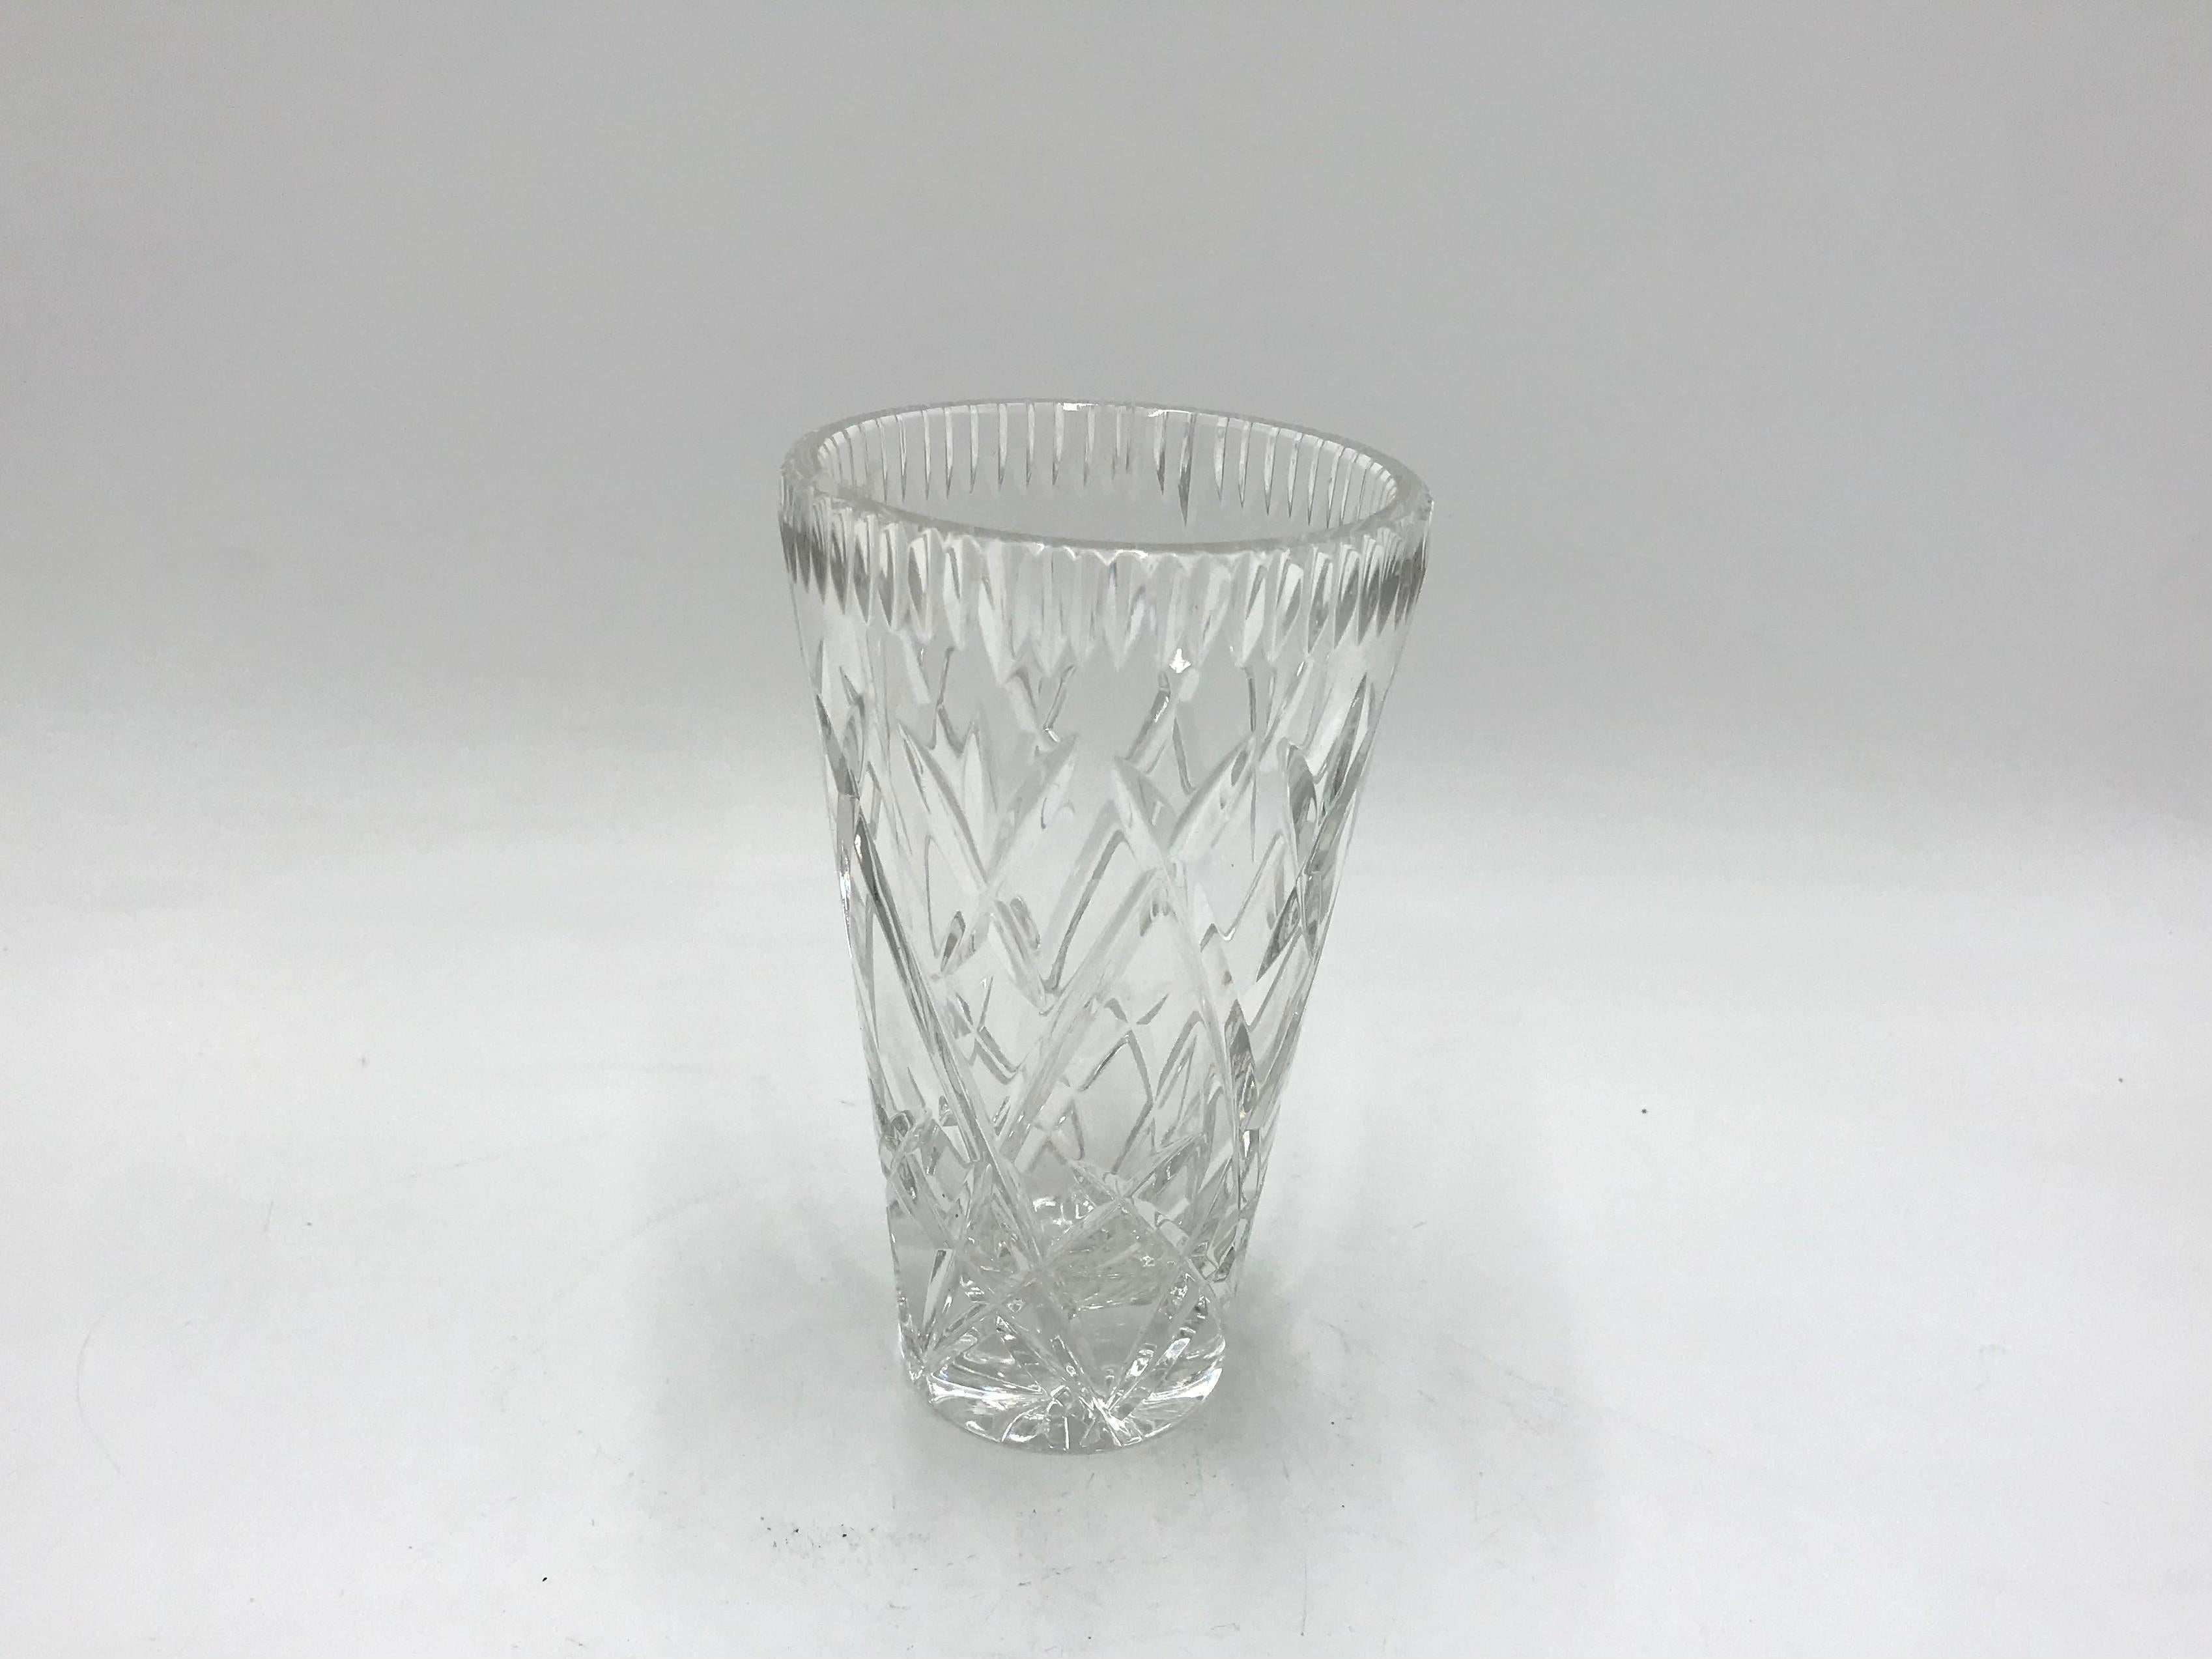 Vase made of crystal. 
The vase was produced in Poland in the 1960s and 1970s.
Vase in very good condition
Measures: Height 16cm / diameter 9cm.